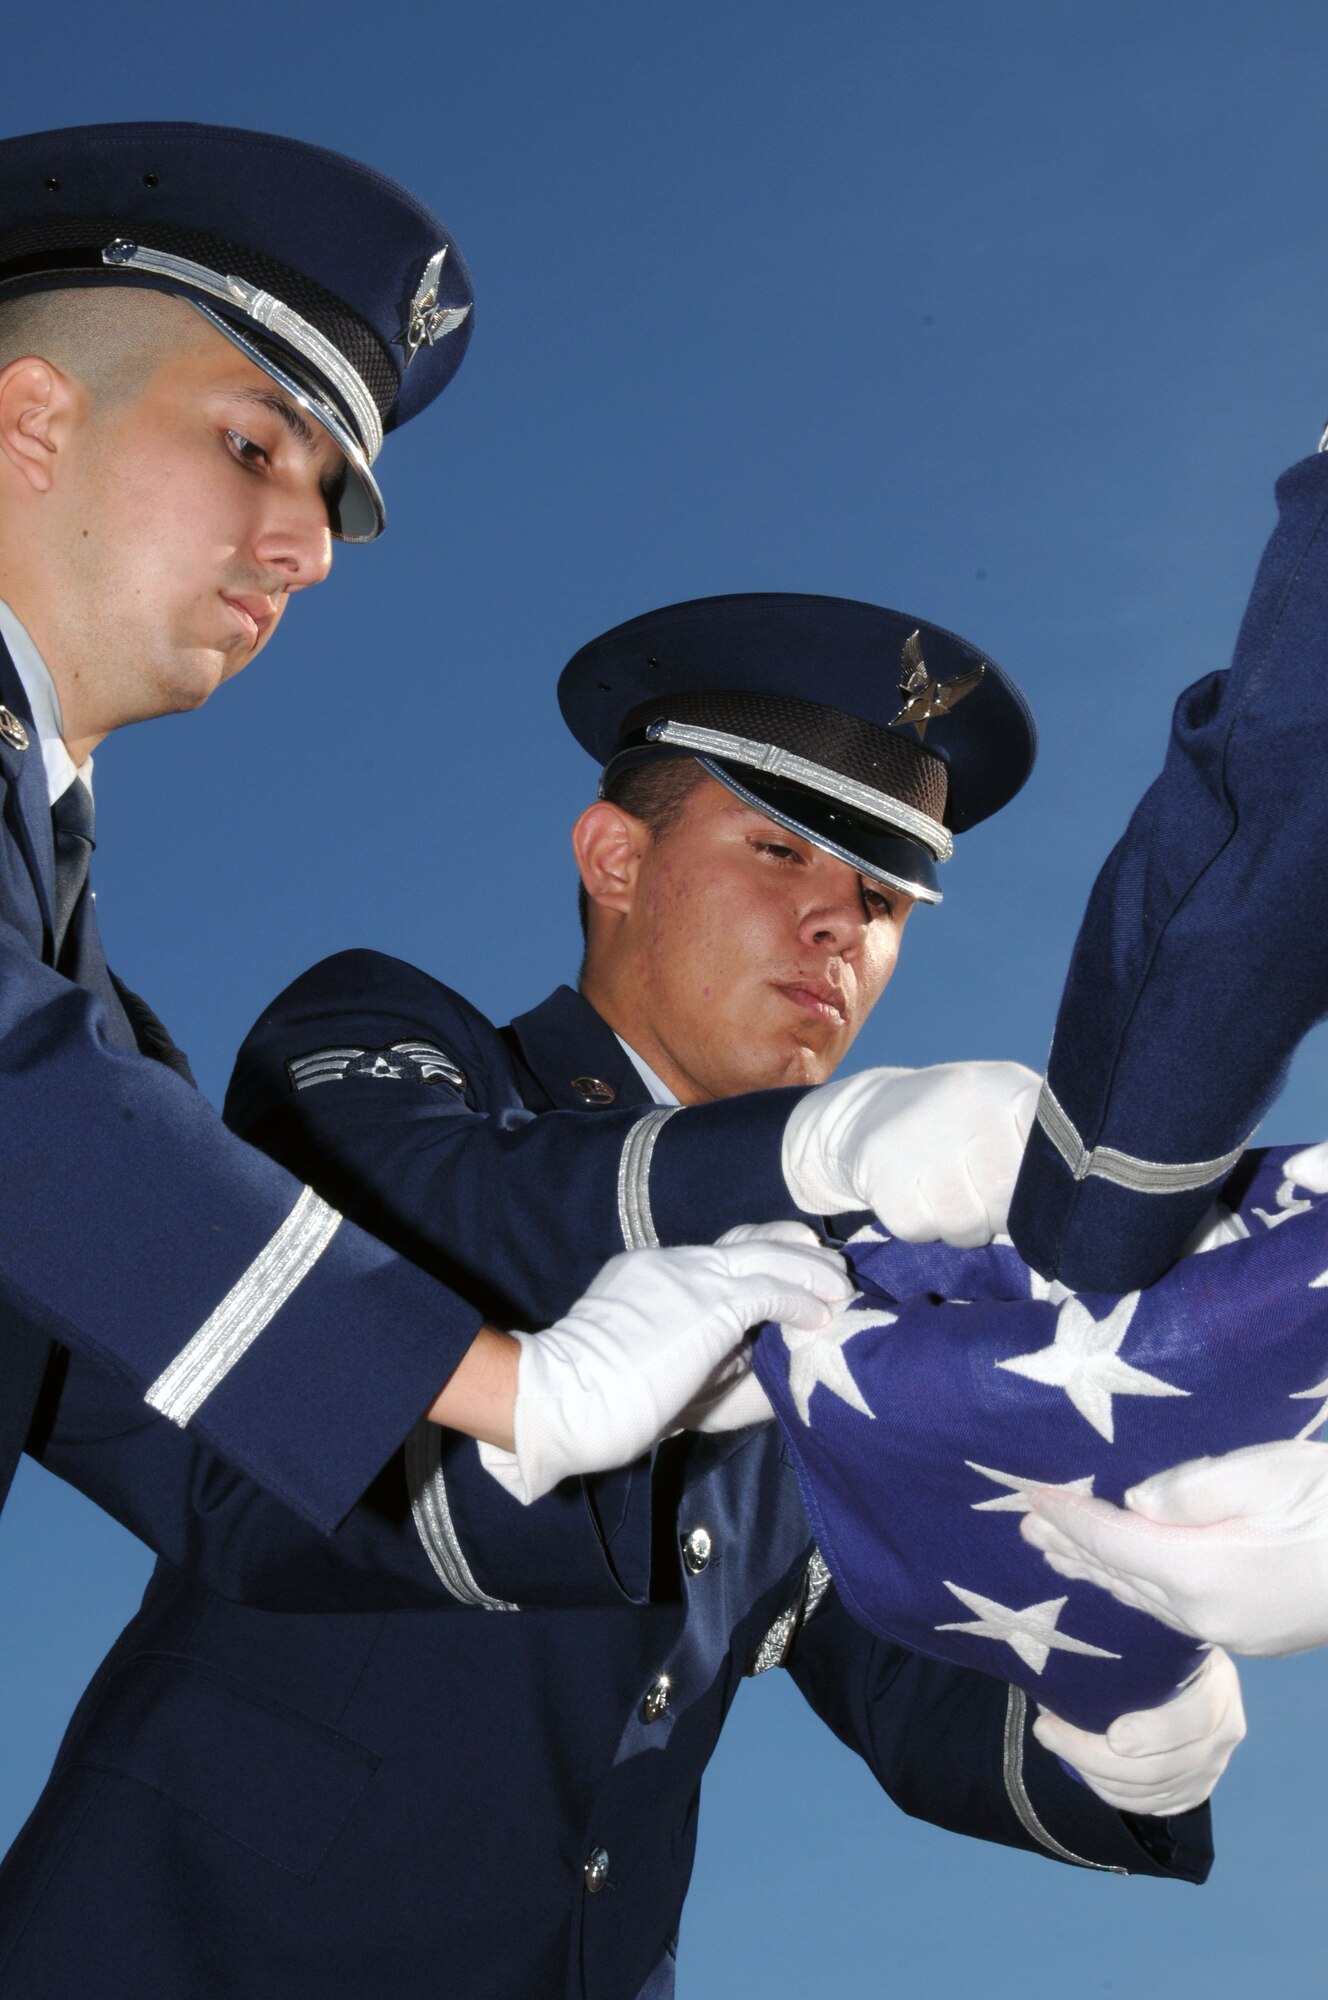 Members of the 103rd Base Honor Guard, 103rd Airlift Wing, finish folding the American Flag during a Sept. 11, 2010 flag-folding ceremony at the Bradley Air Park, Bradley Air National Guard Base, East Granby, Conn. (U.S. Air Force photo by Tech. Sgt. Theodore Andrews)